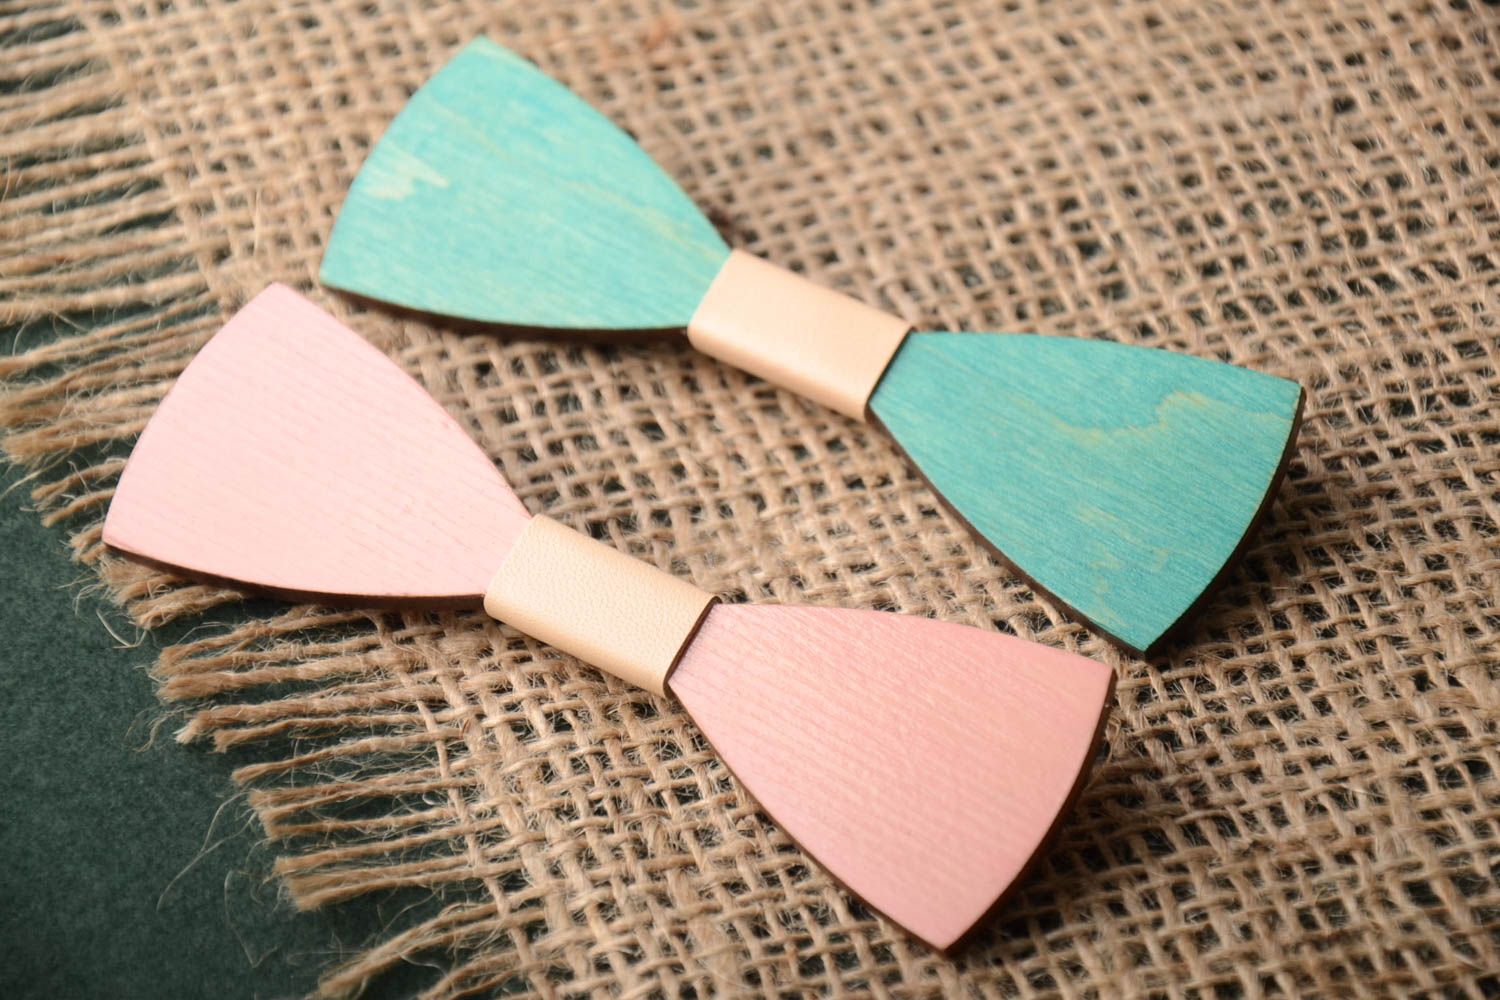 Handmade wooden bow ties brooch jewelry designer accessories unique gifts photo 1